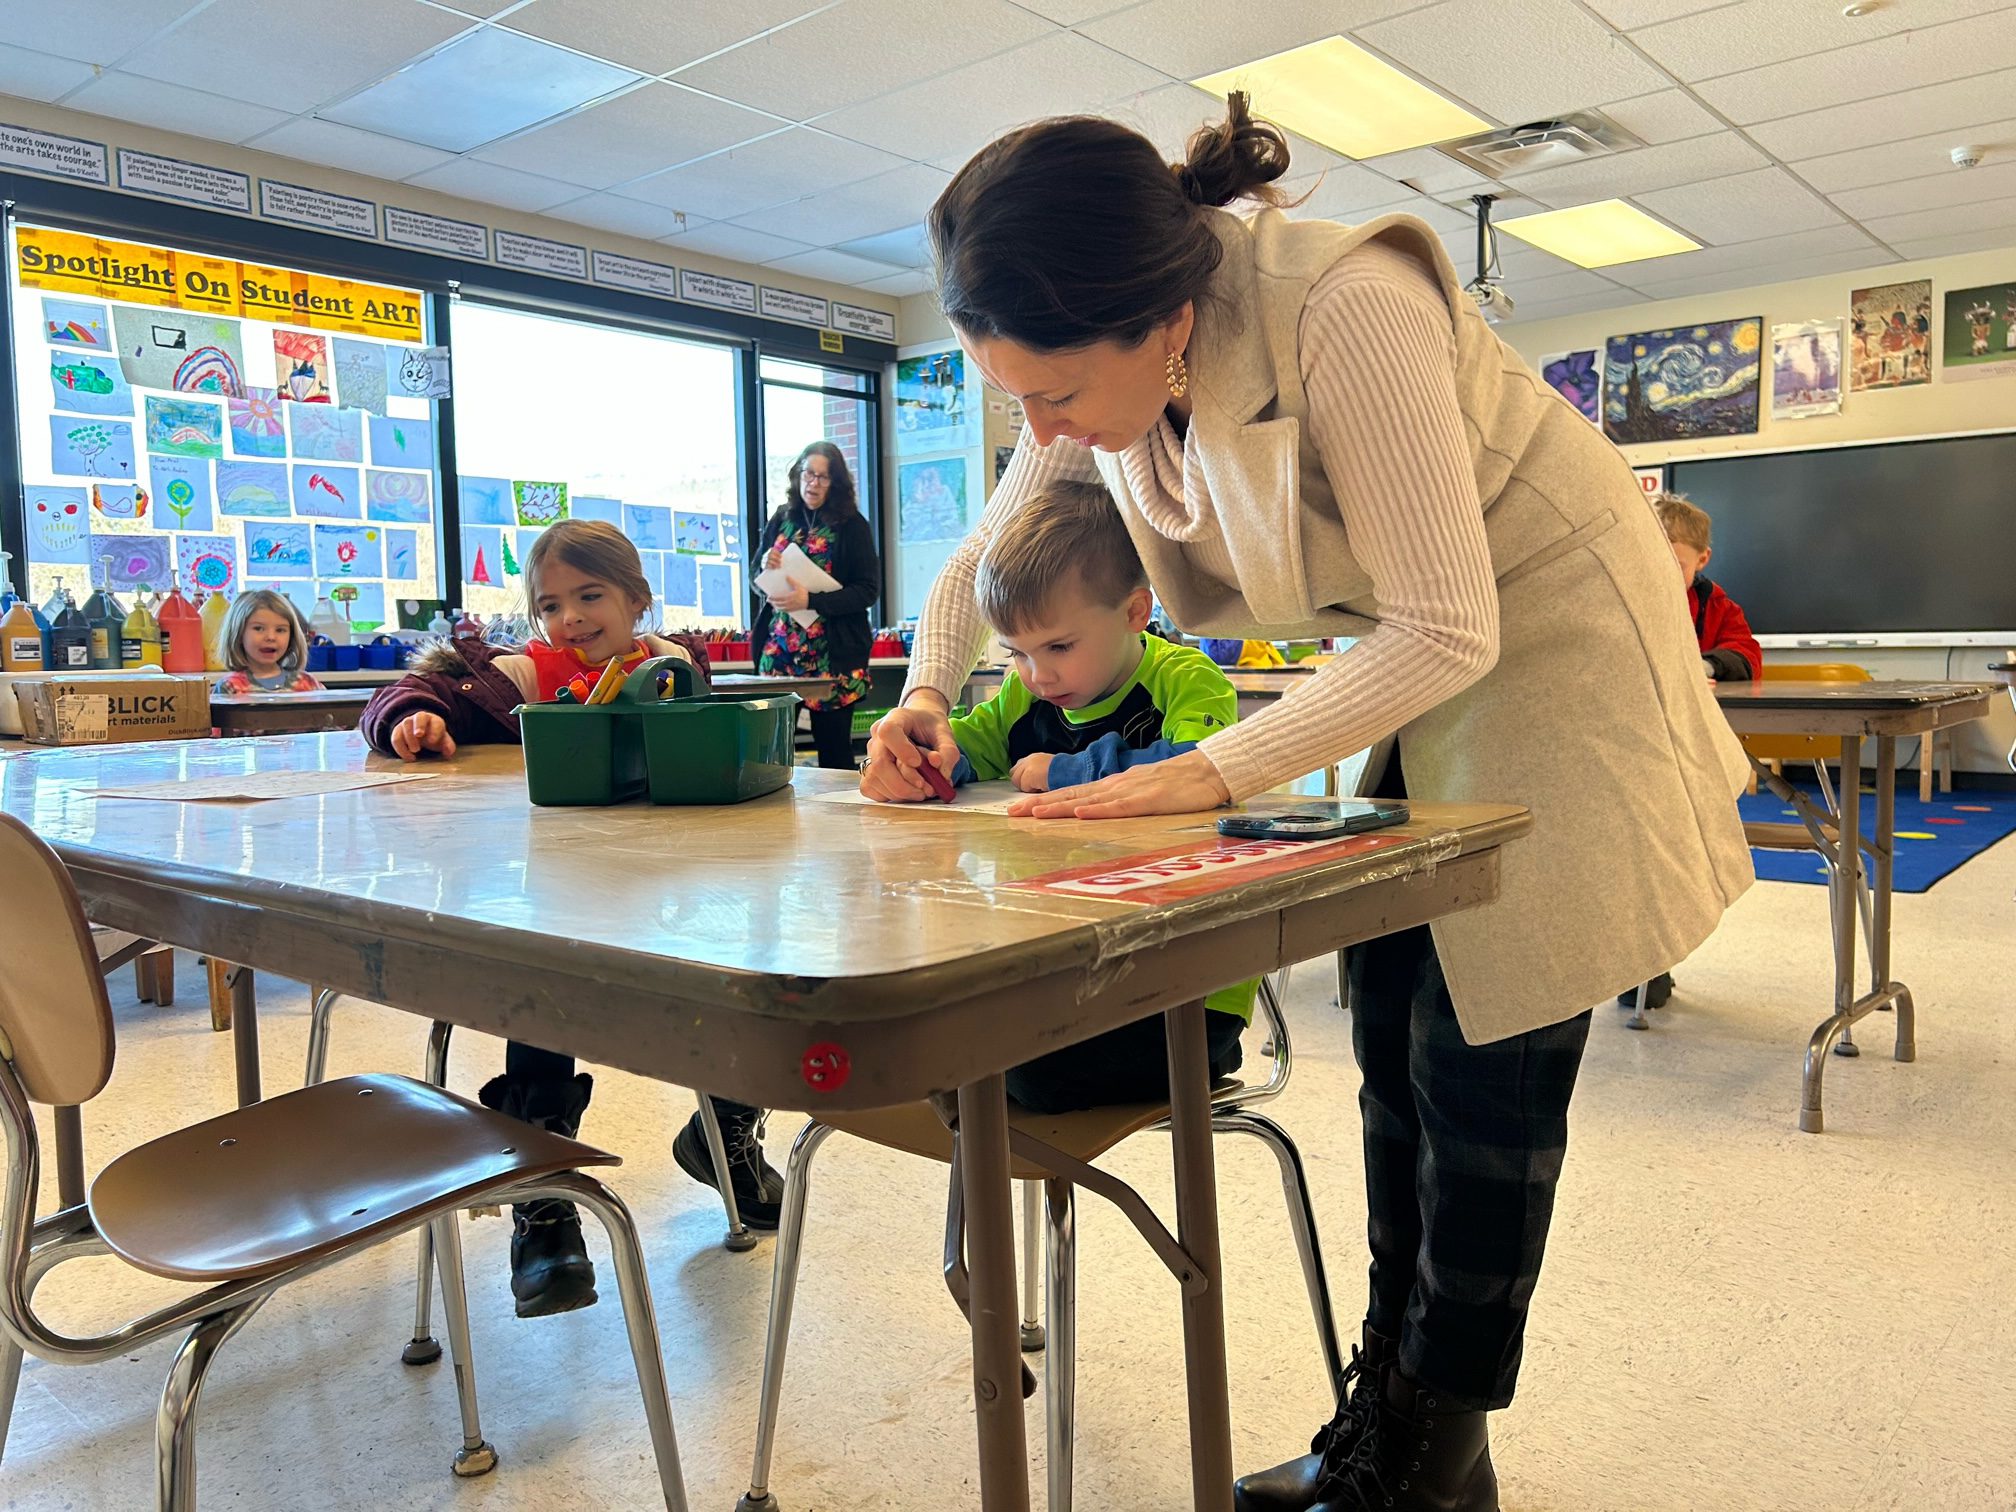 A teacher assists a student as another student looks on.